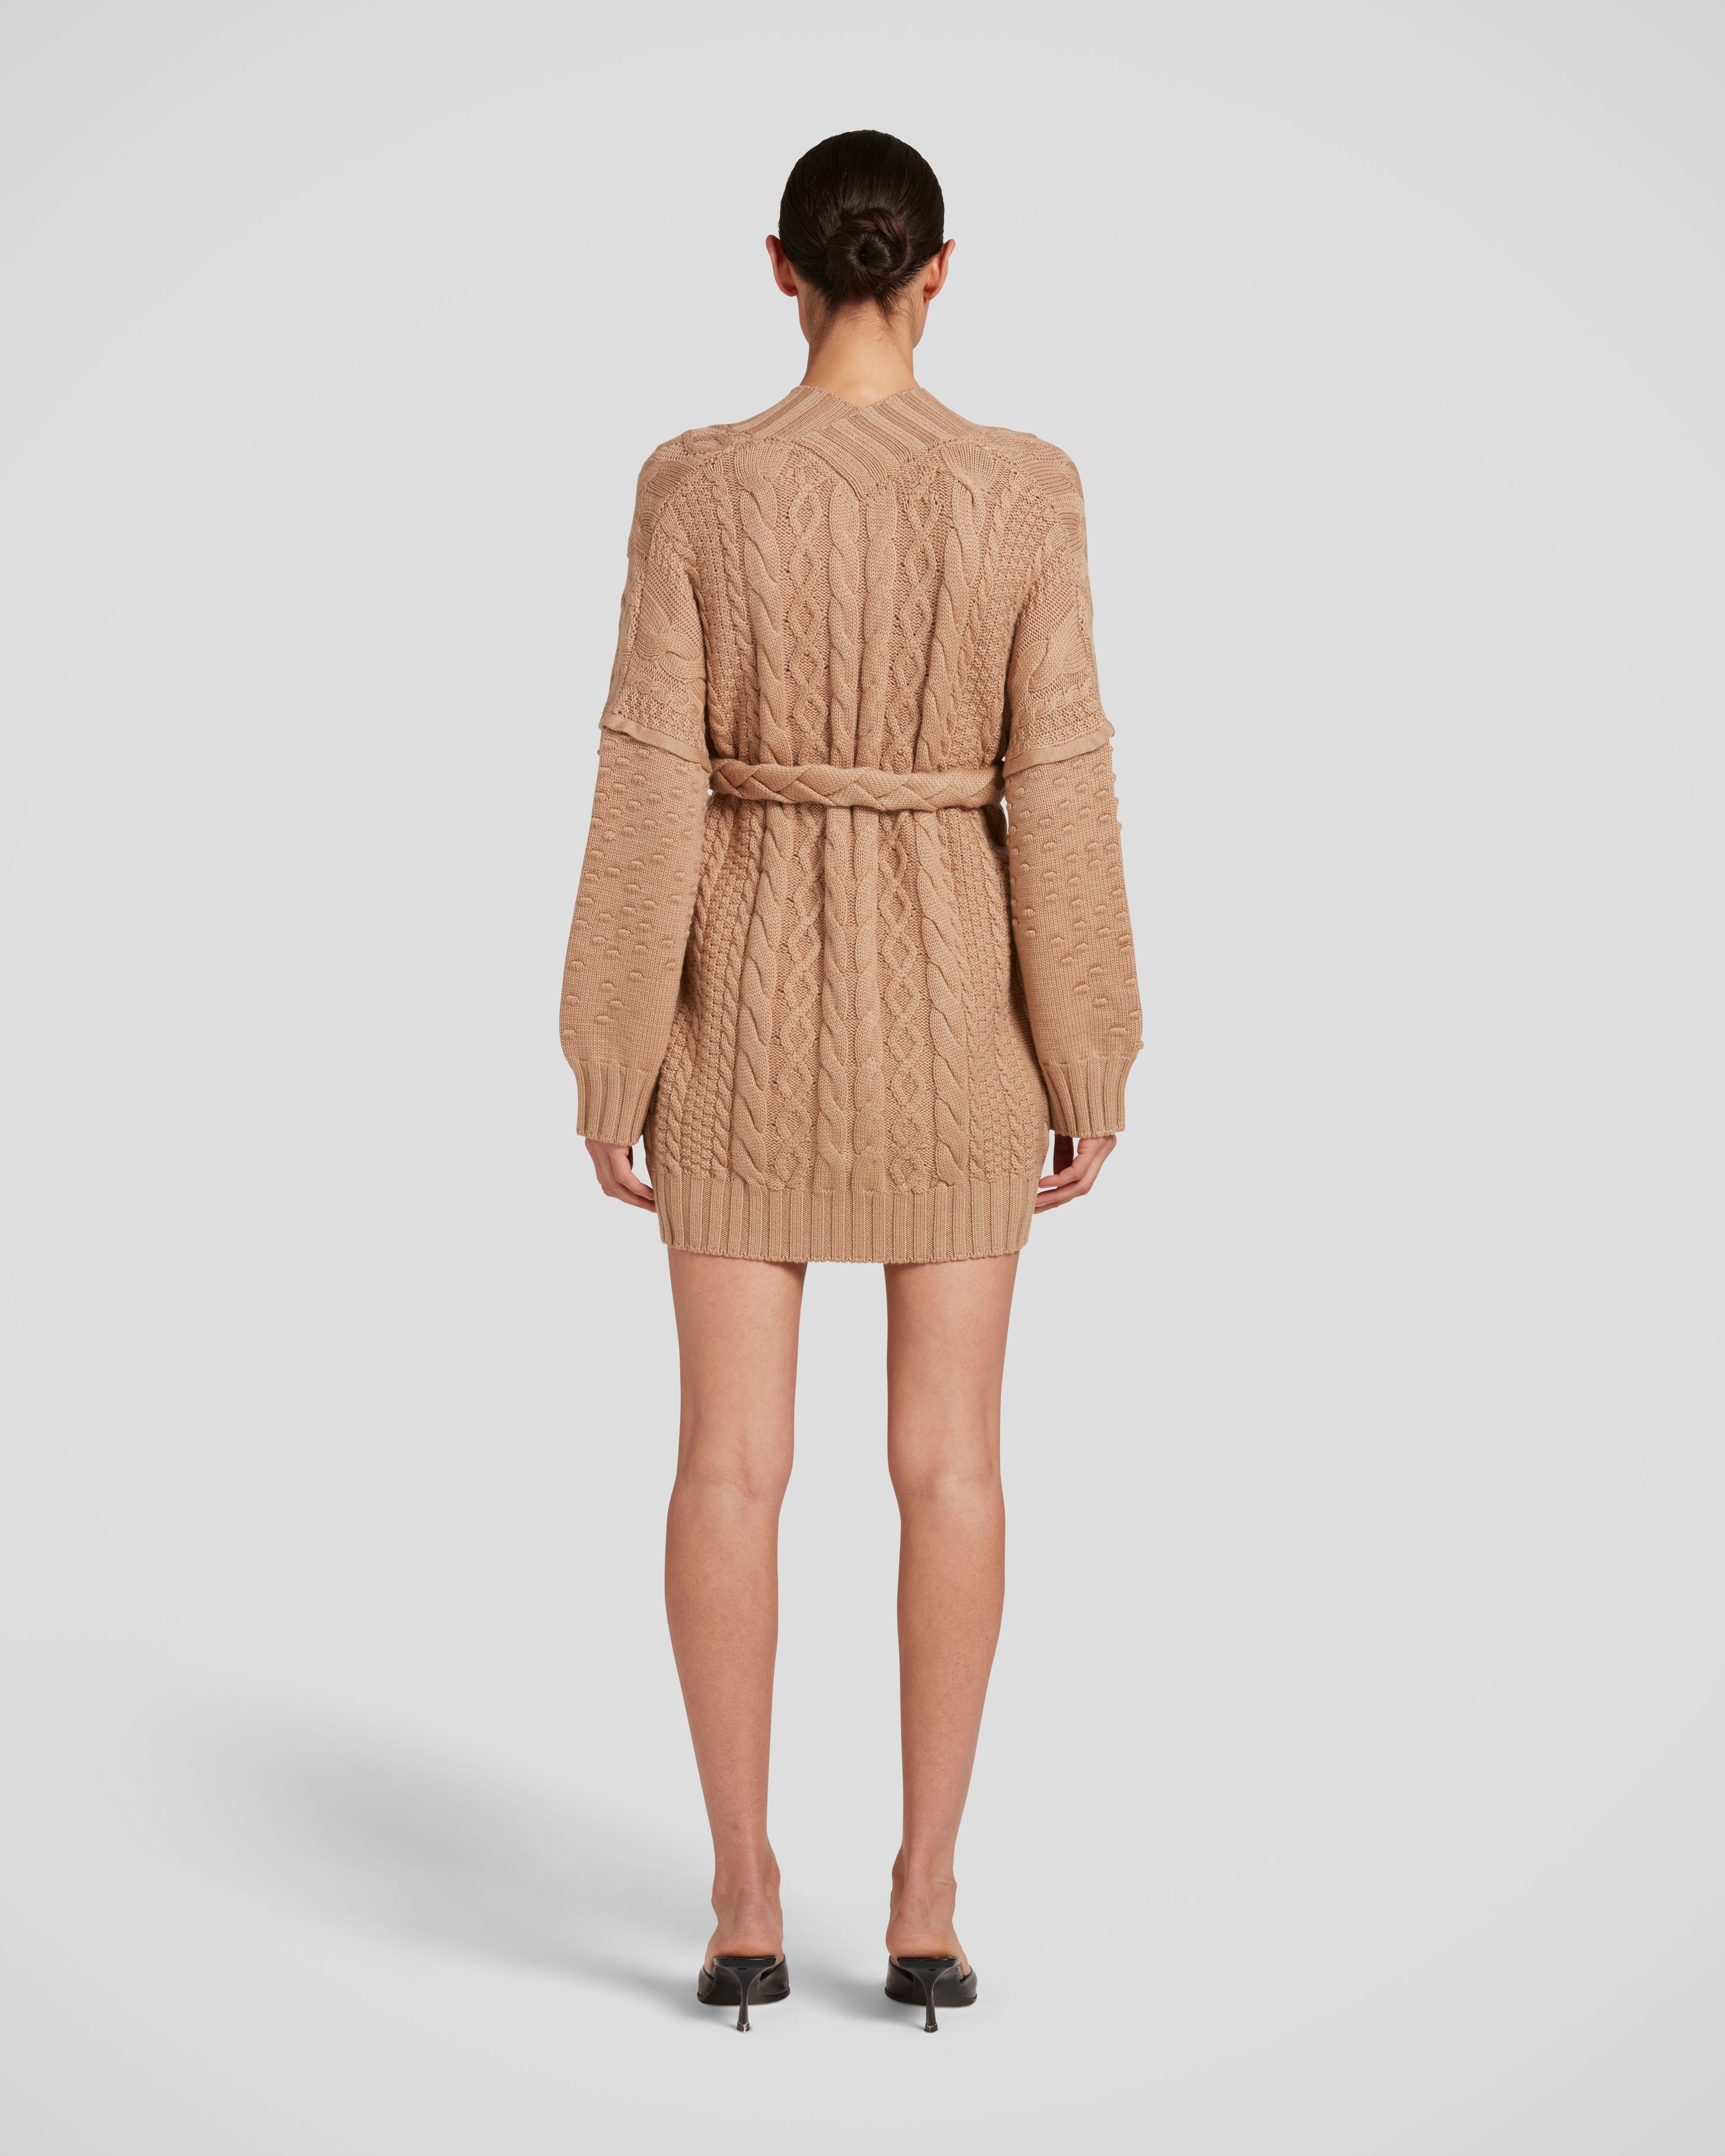 Tracey Knit Coat